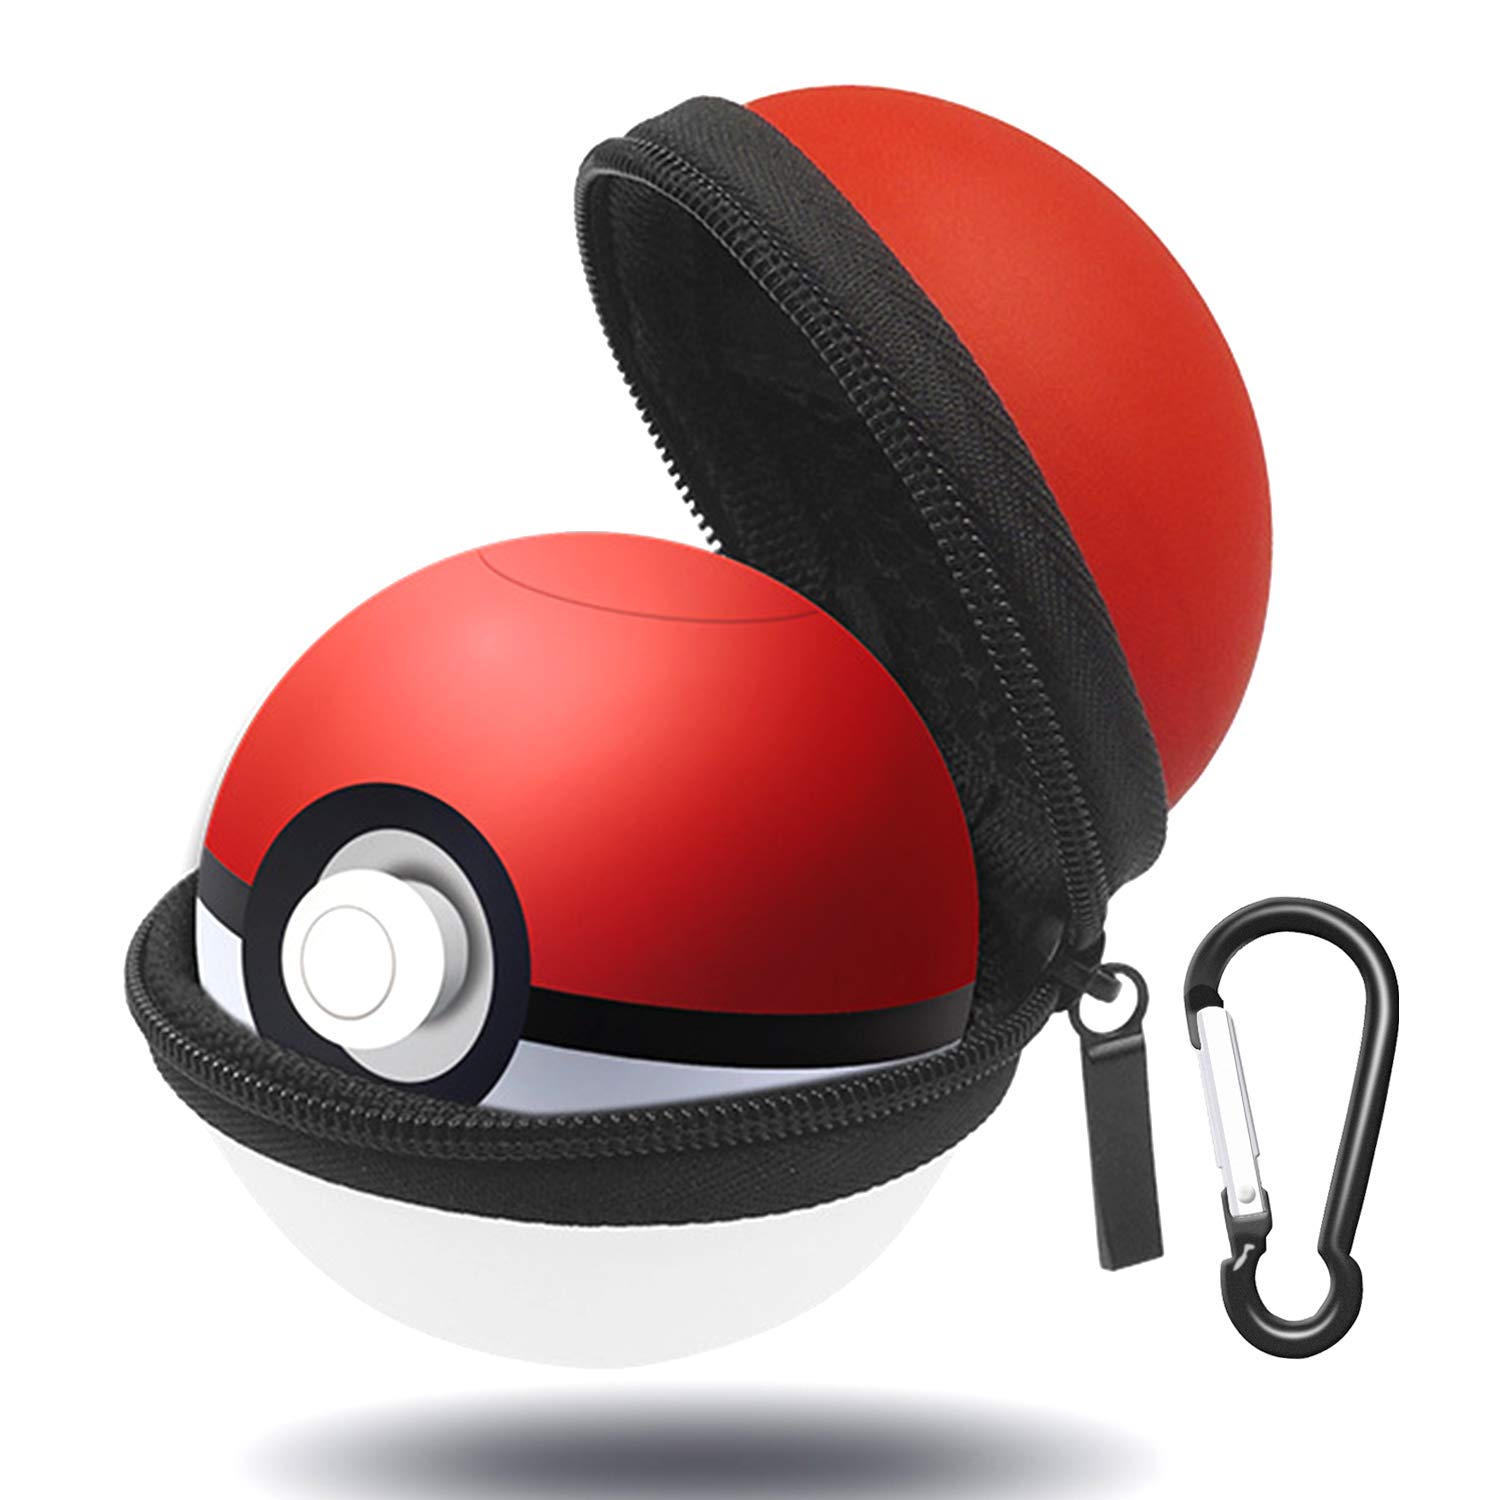 Book Cover Carrying Case Compatible with New 2018 Pokemon Poke Ball Puls Controller, Protective Hard Portable Travel Pokeball Case Bag for Nitendo Switch Accessories Pokeball(Red)